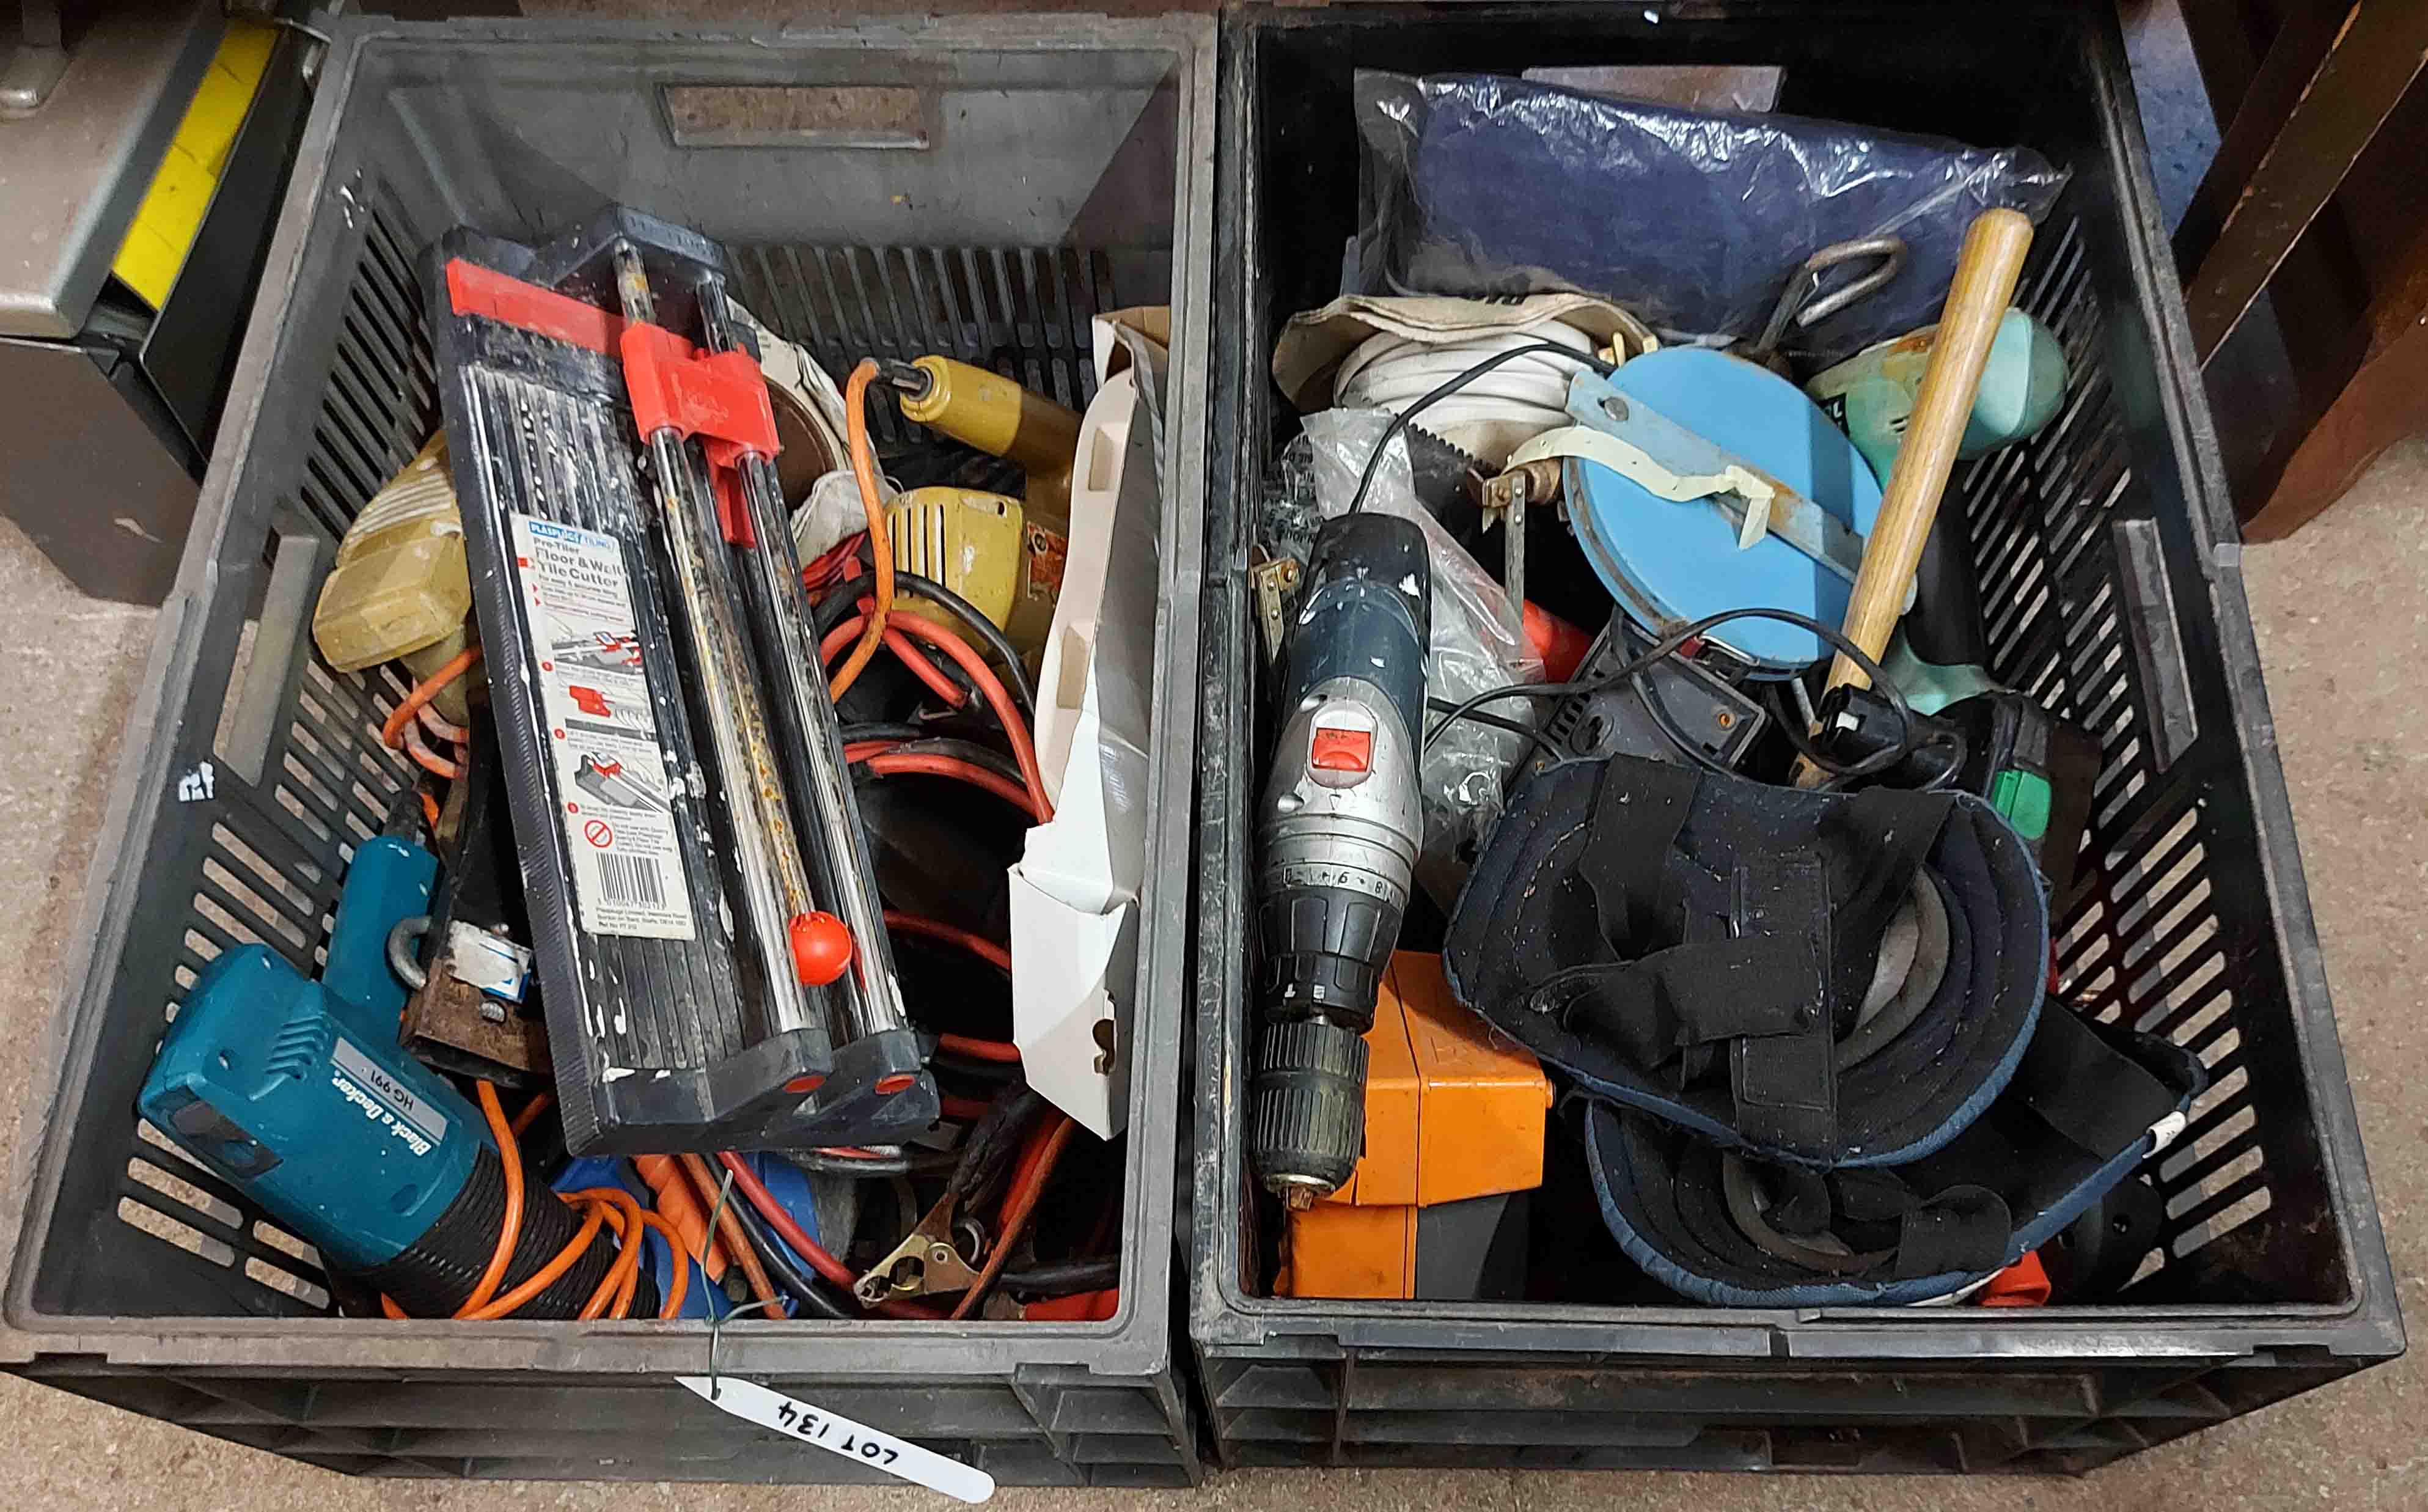 Two crates containing tools including drills, battery chargers, etc.